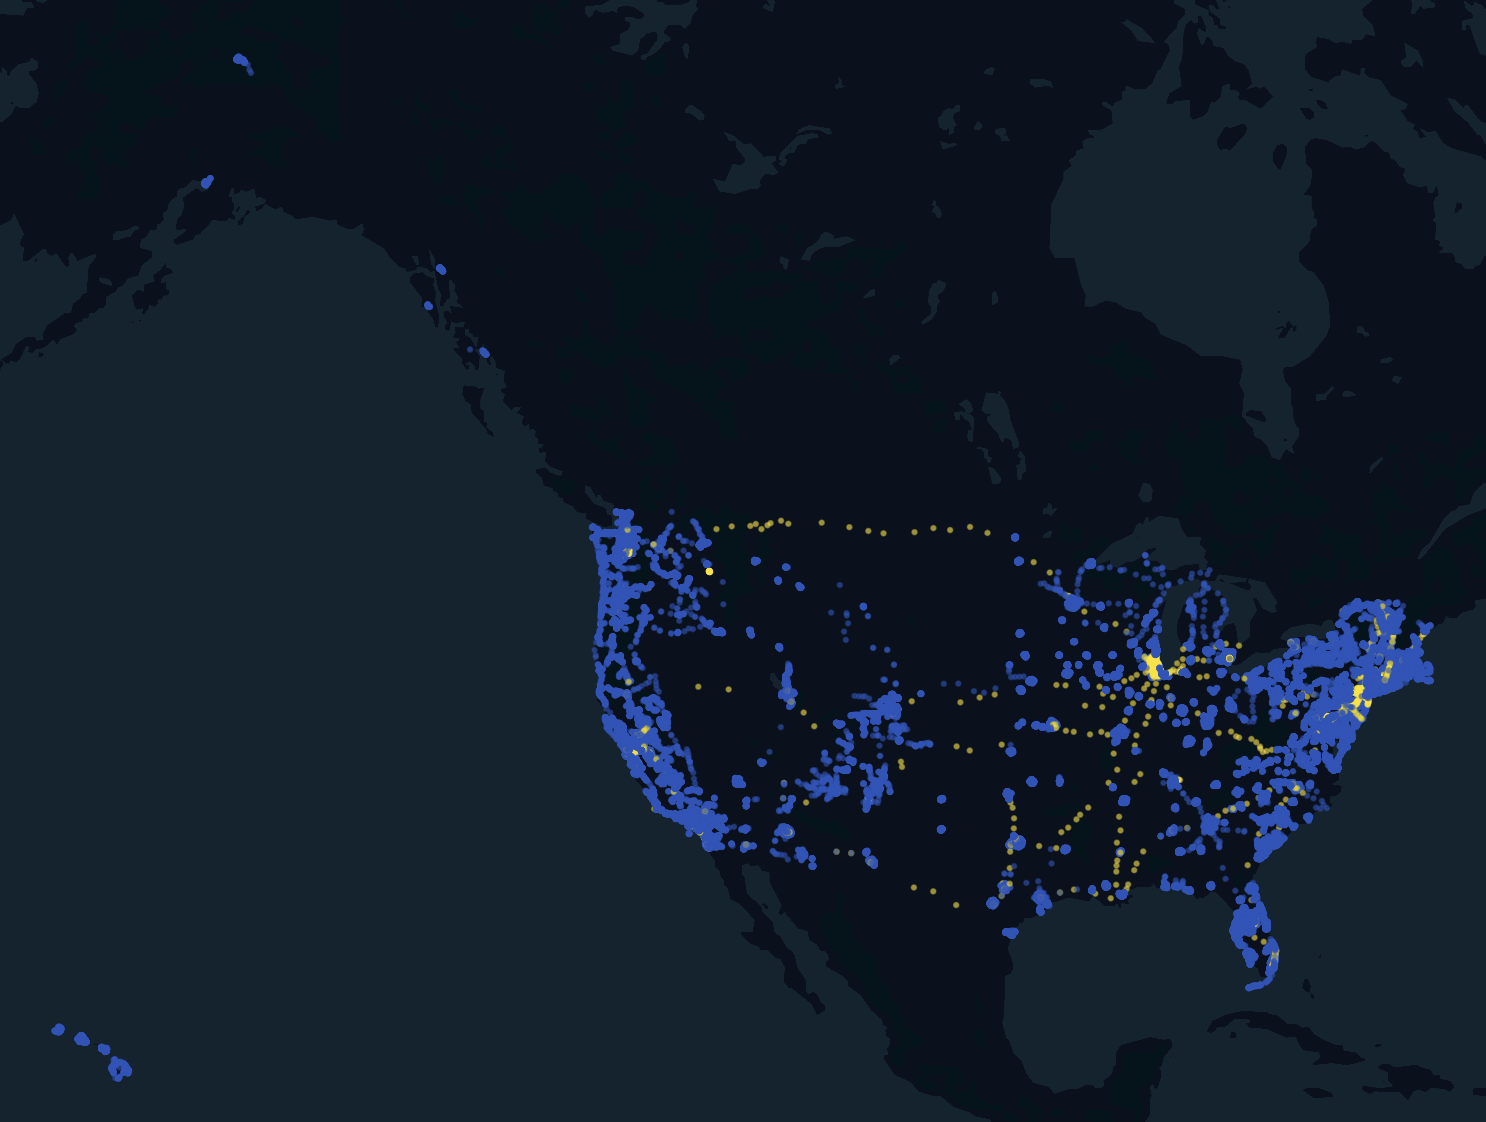 animated map of stop points across the continental United States, Hawaii, and Alaska